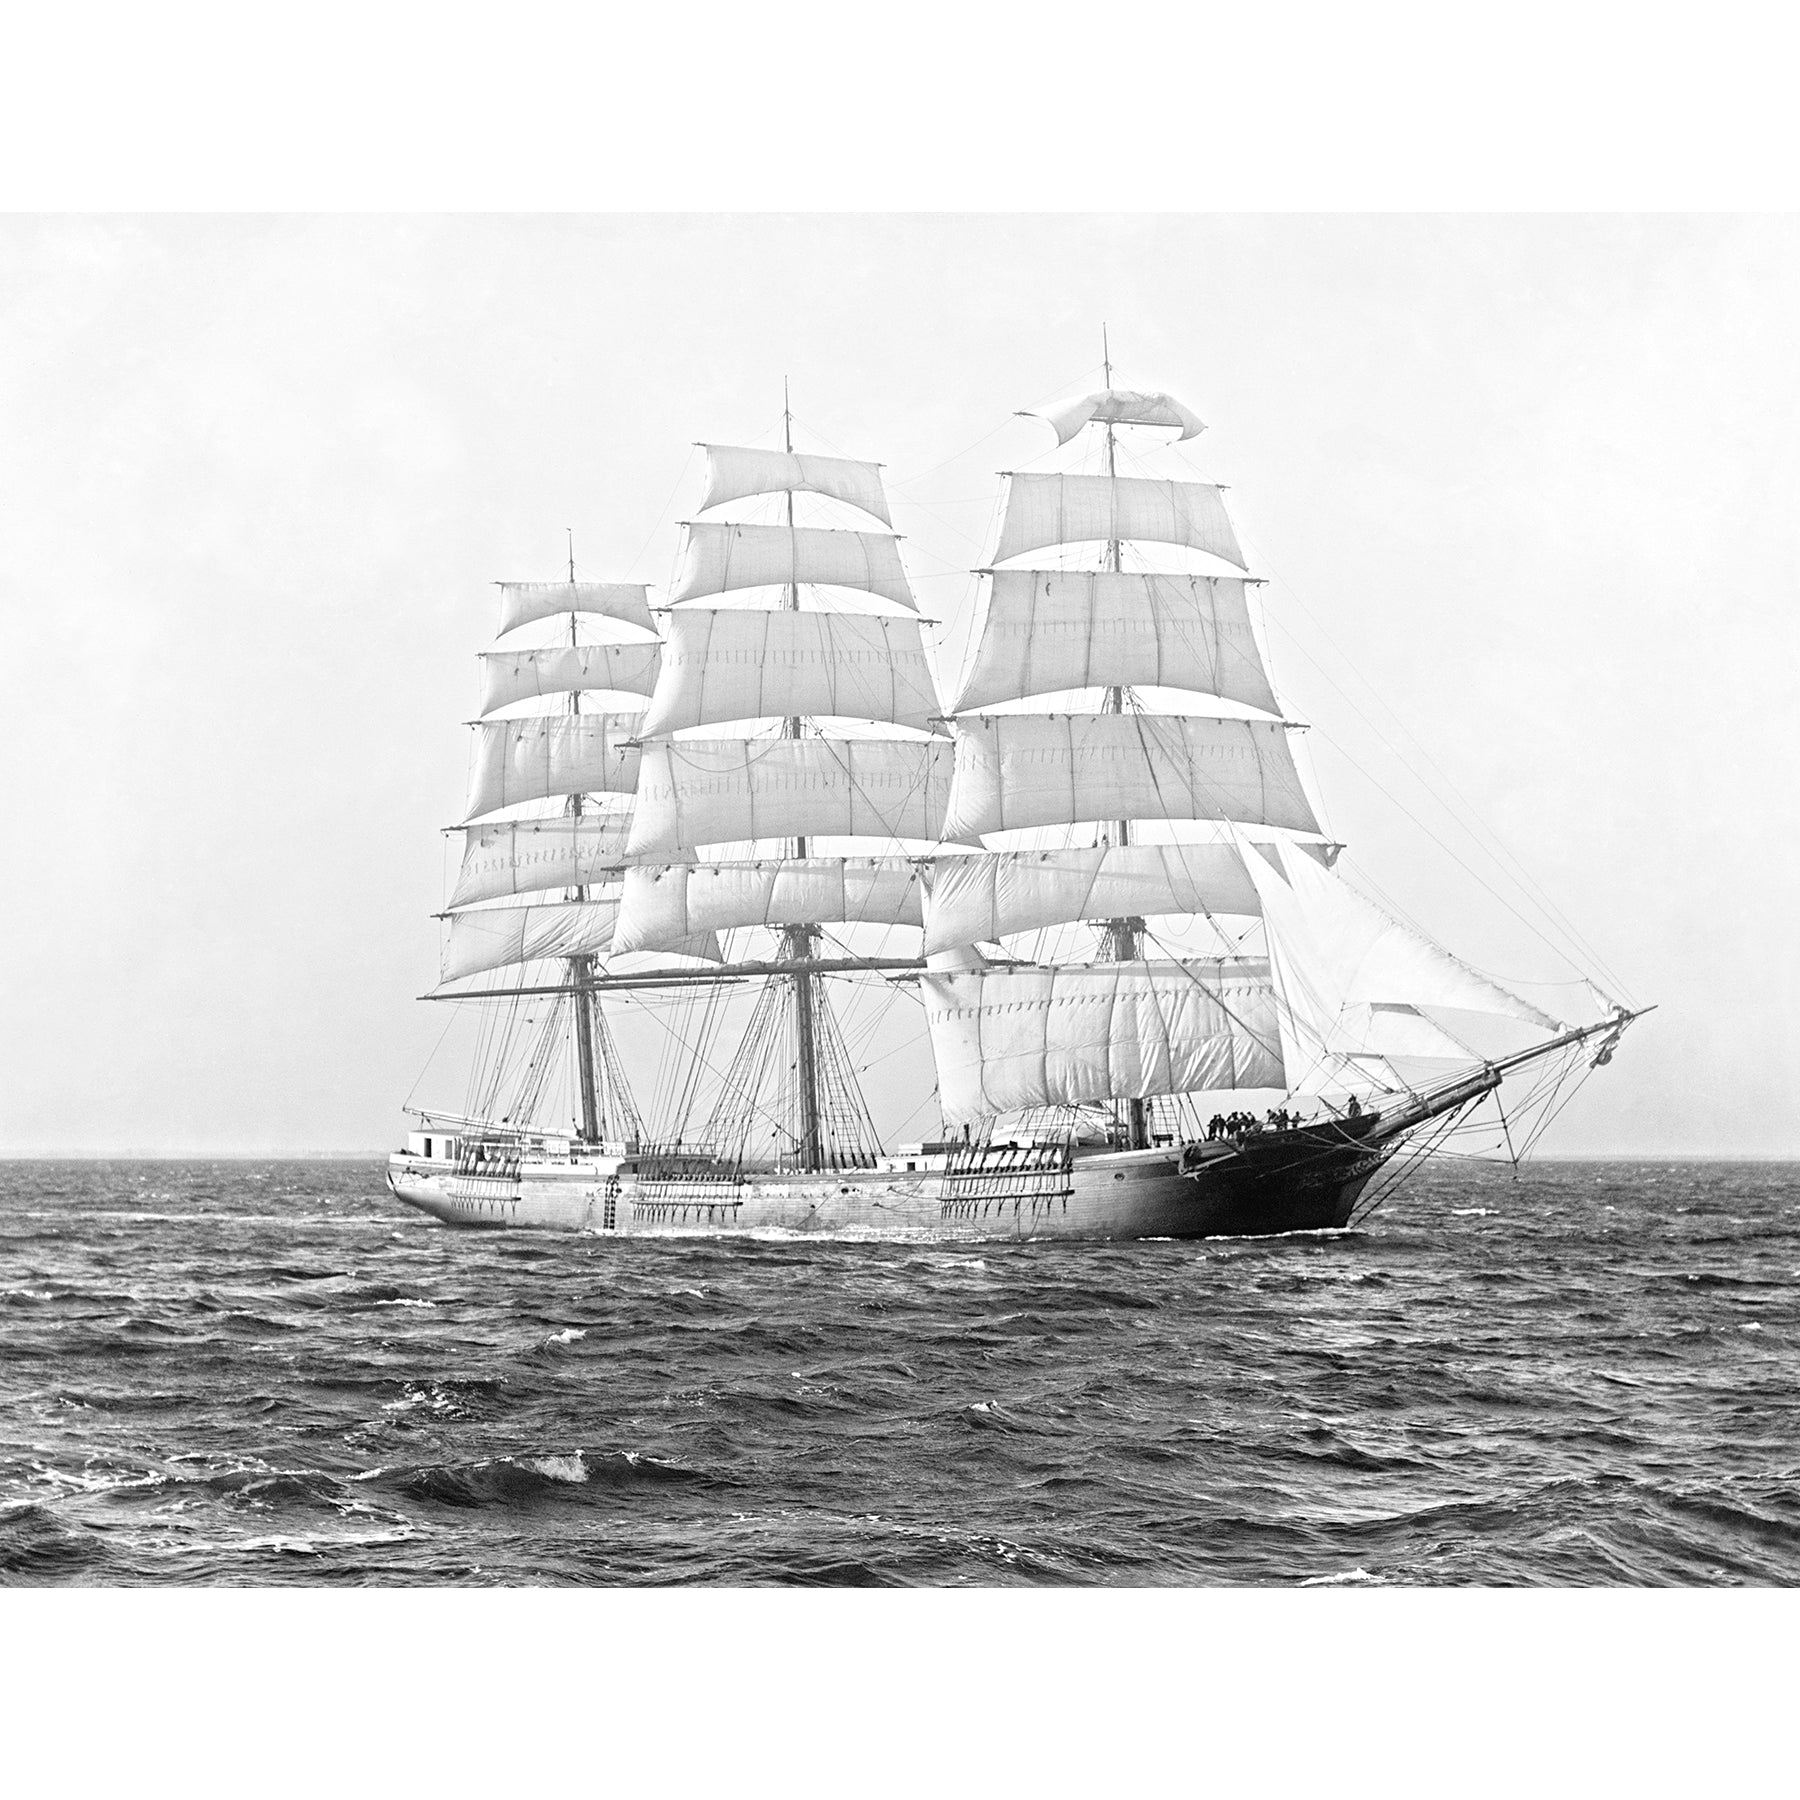 A vintage, black and white photograph of the Clipper Ship St. David on the water